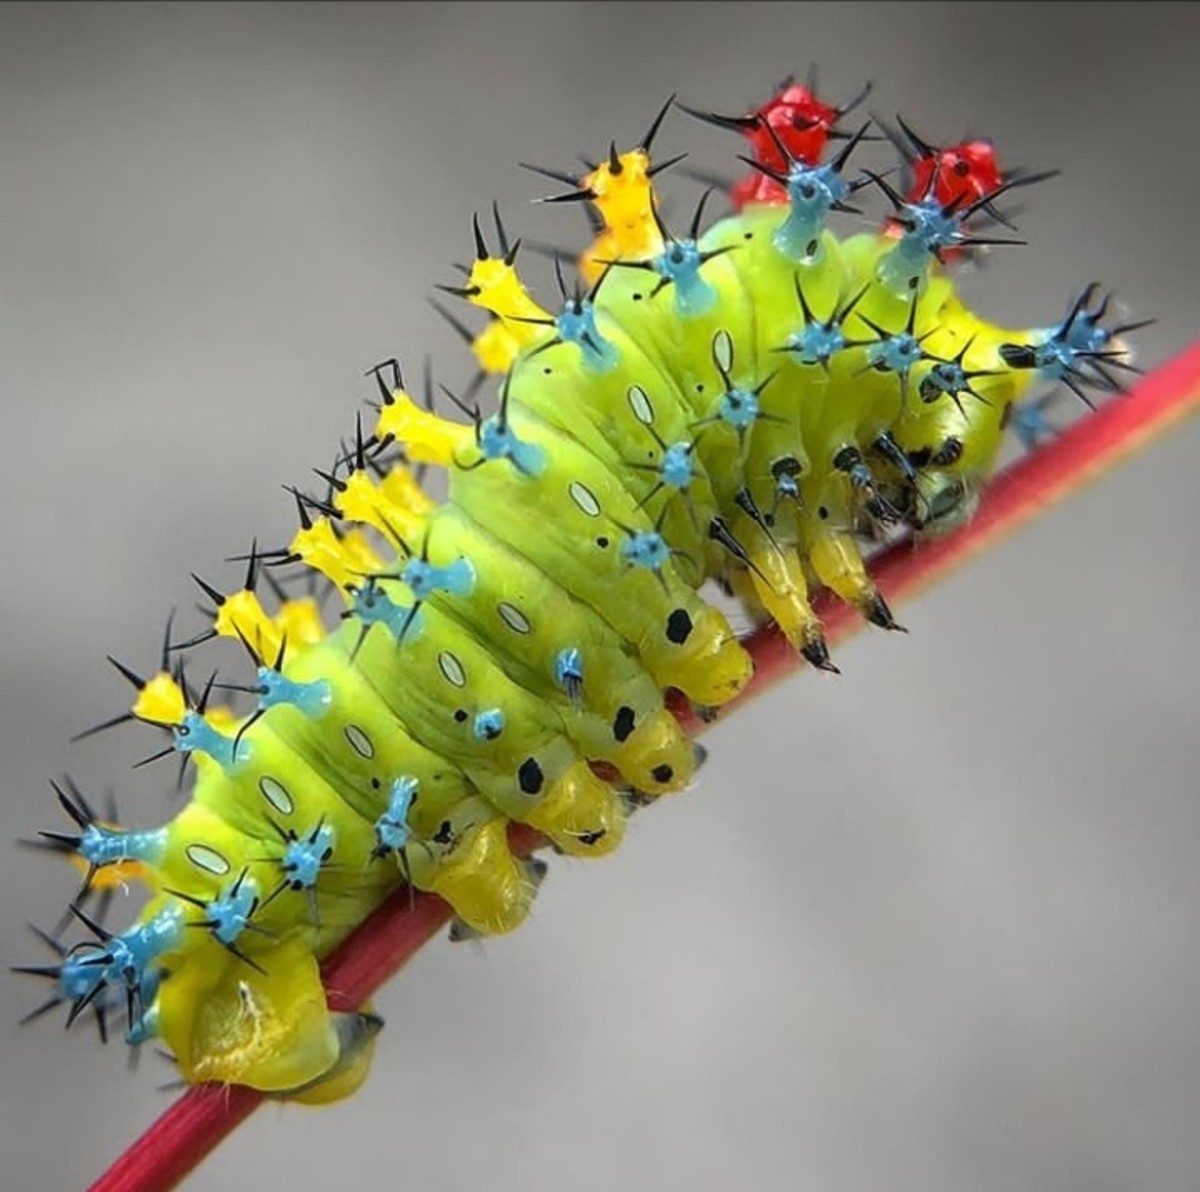 Top 10 Most Beautiful Insects in the World | Owlcation